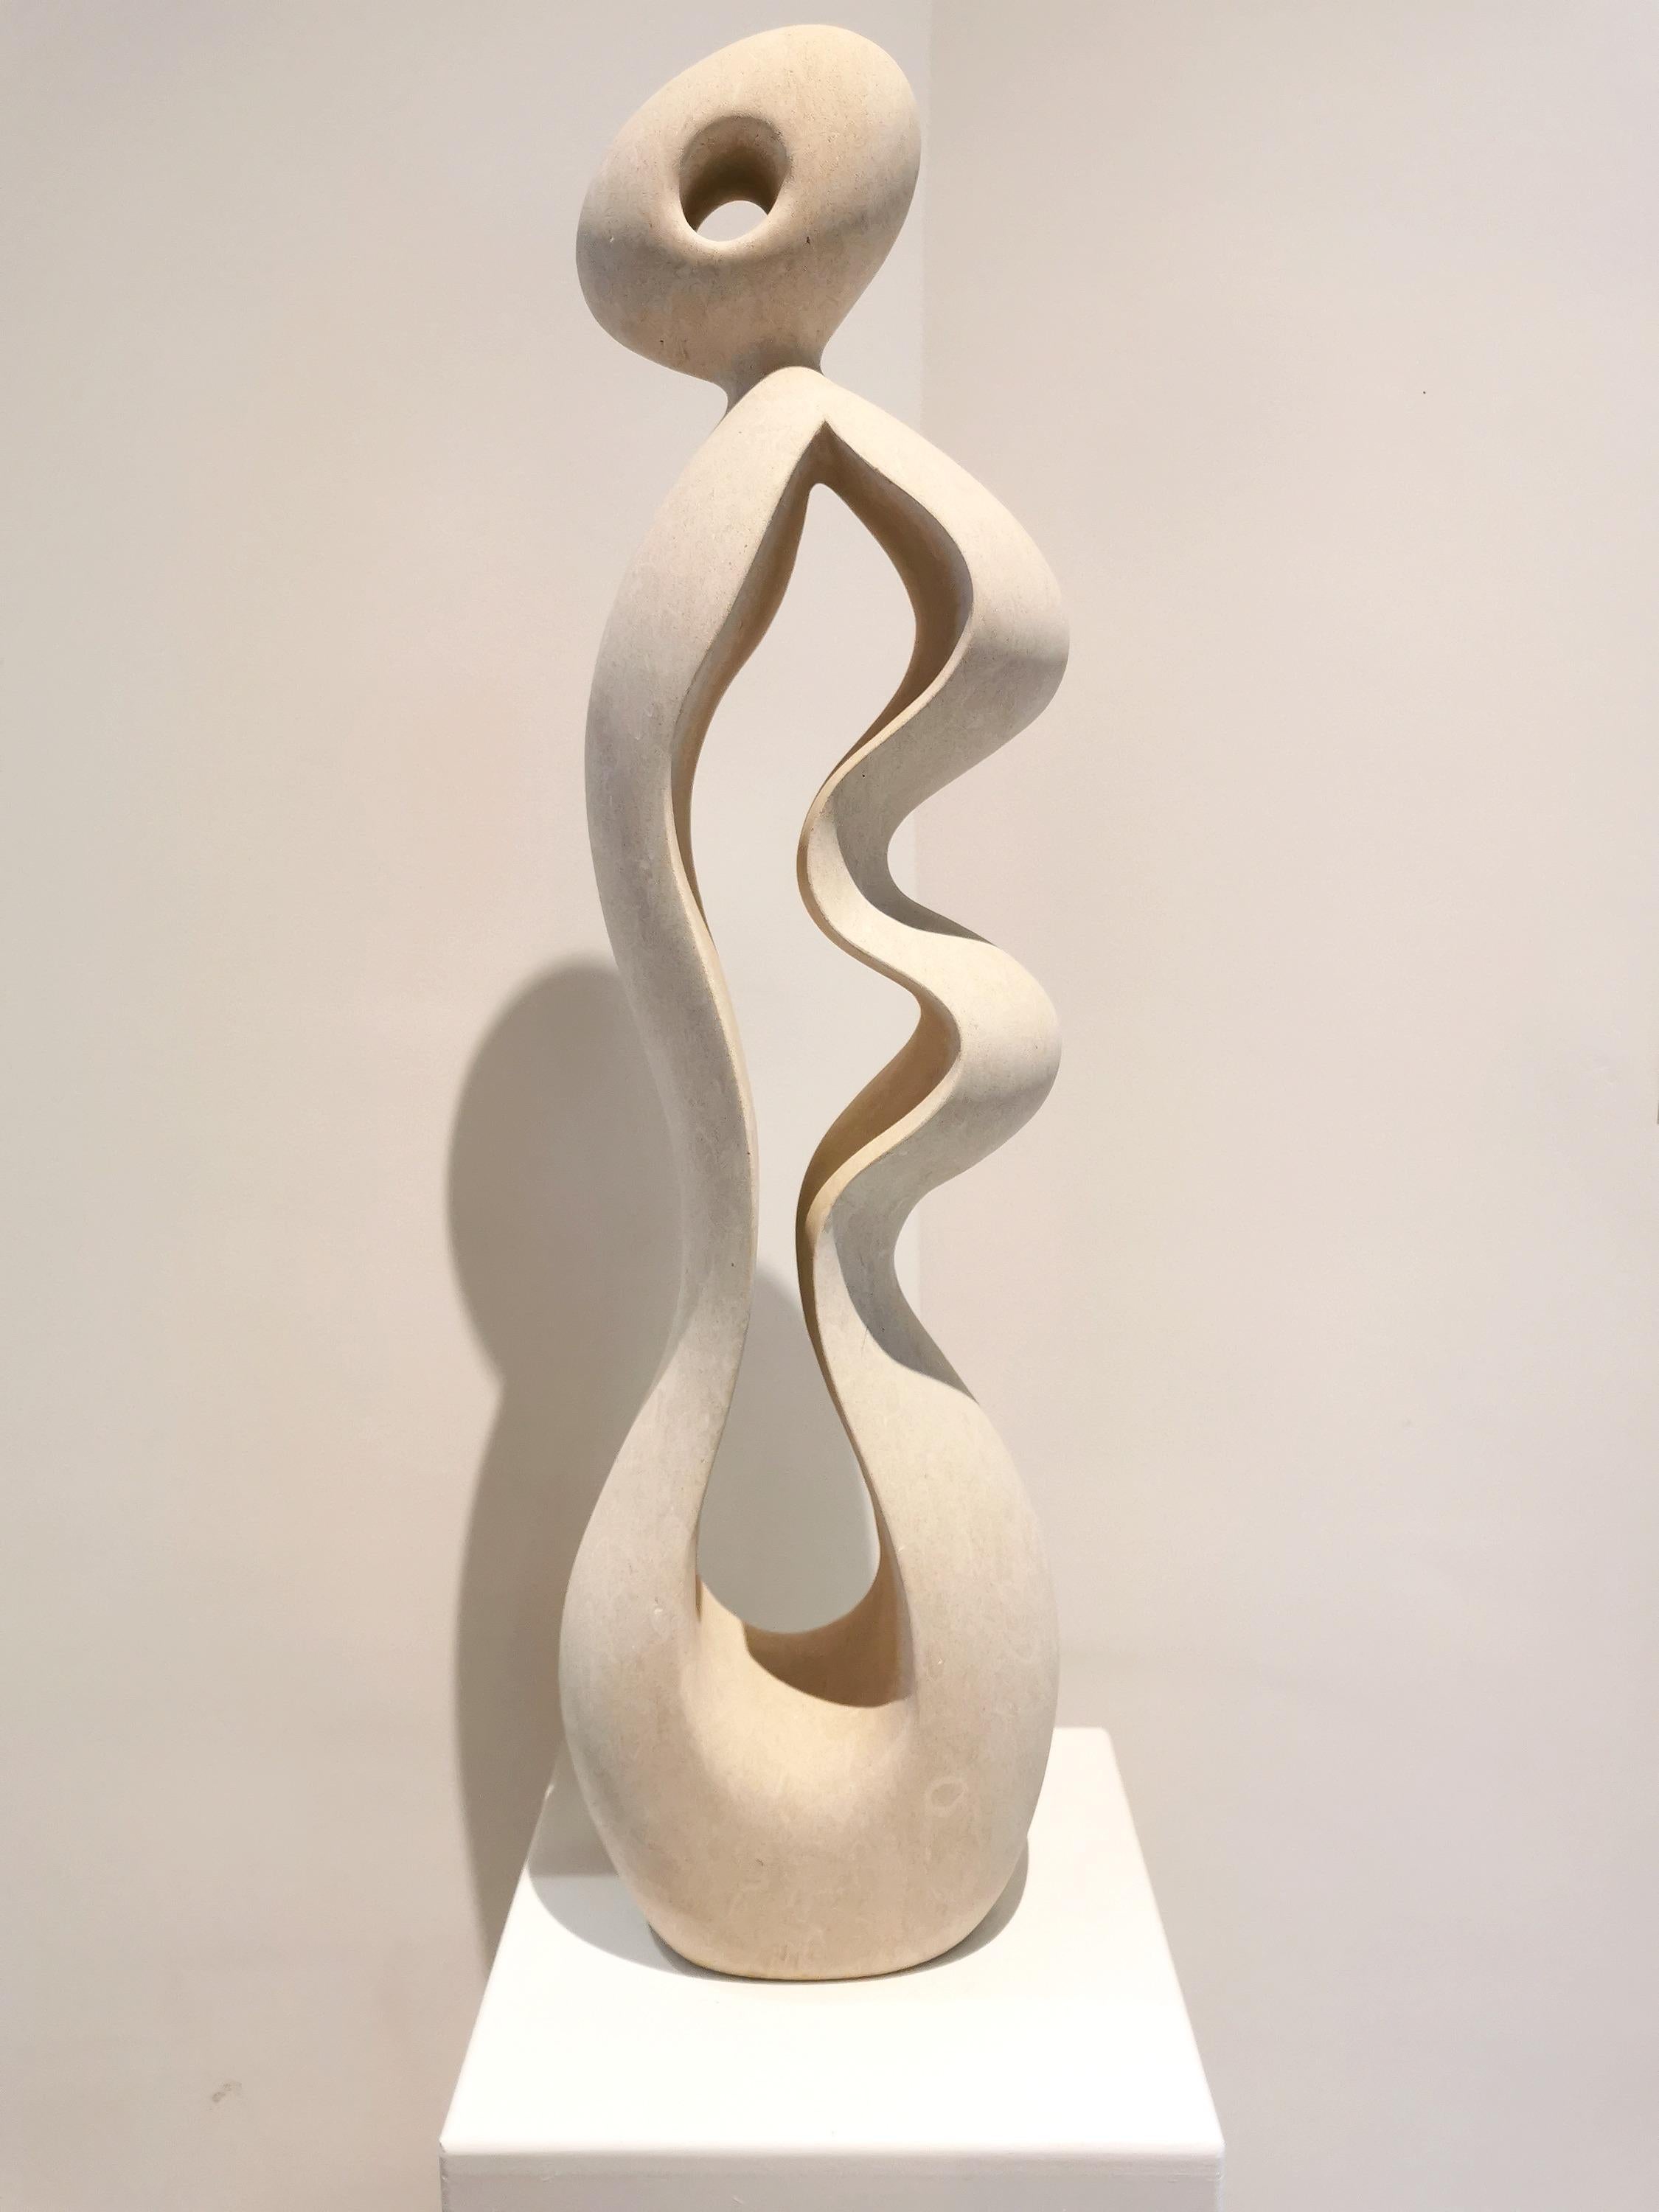 Italian 21st Century Abstract Sculpture CLYTO 80 cm height by Renzo Buttazzo For Sale